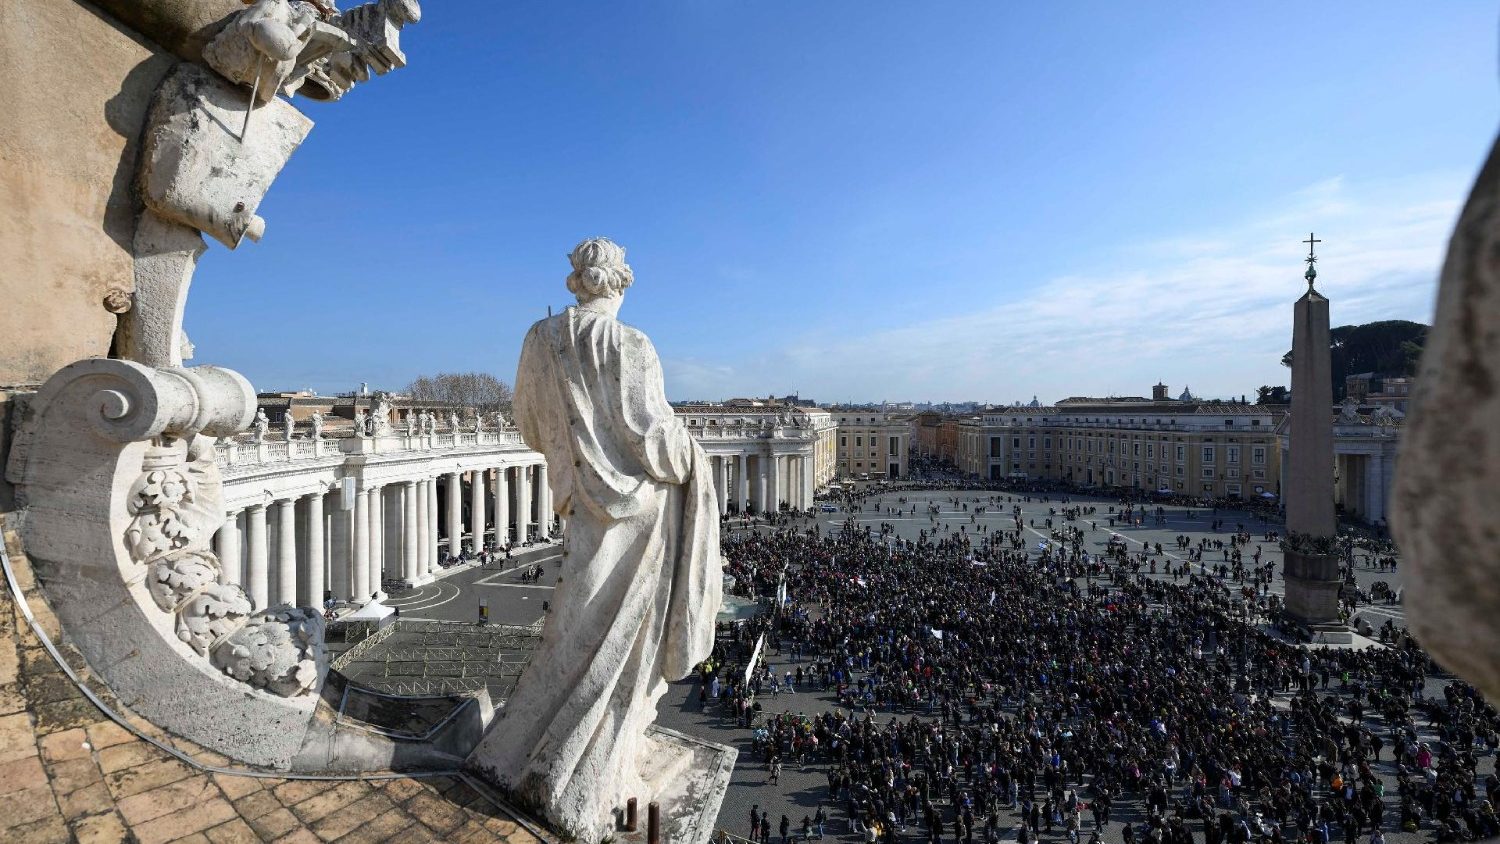 Angelus: “Never negotiate with Satan, ask Jesus to free you from his chains”